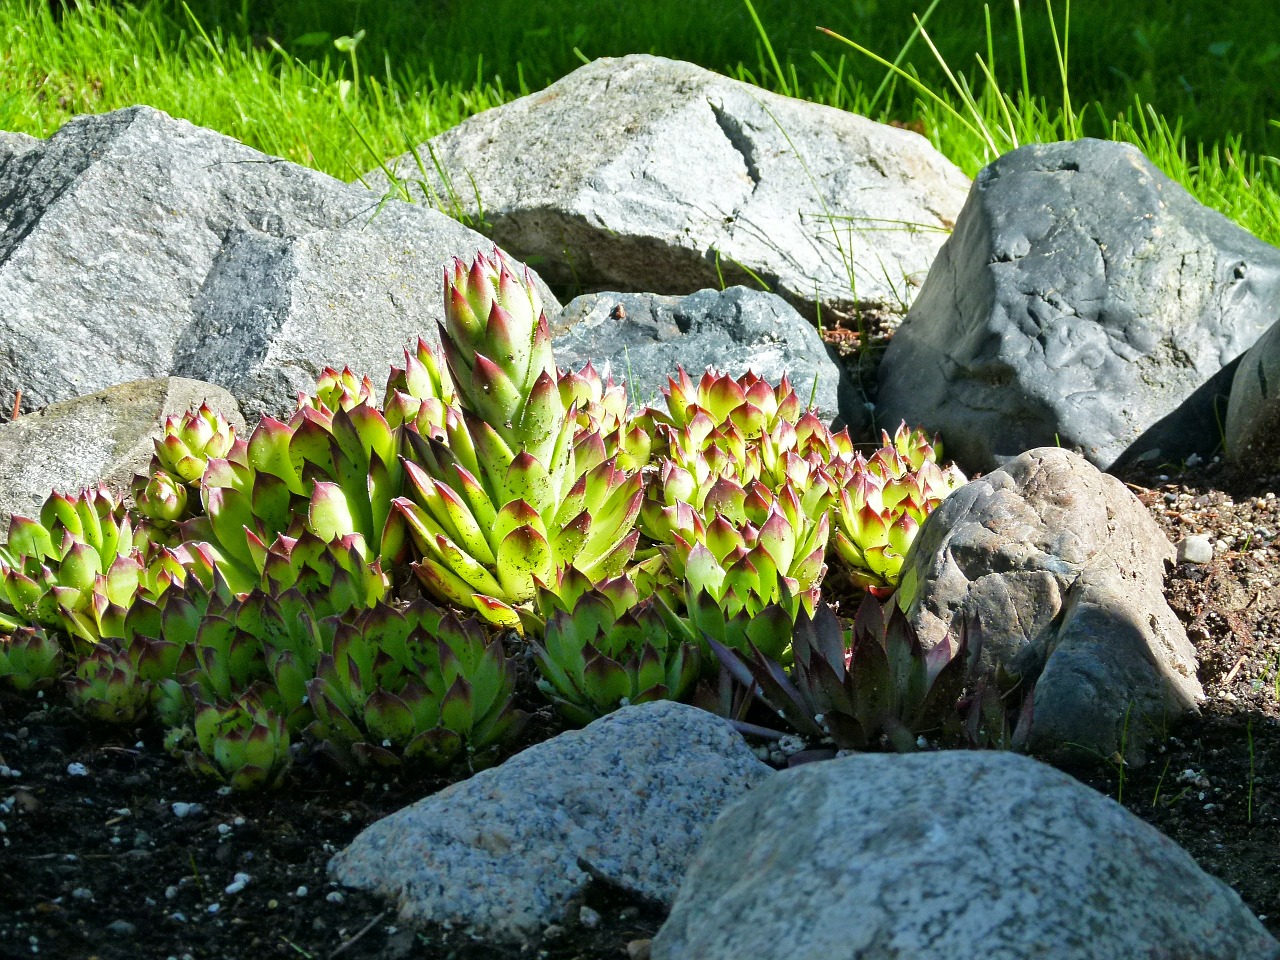 hens and chicks succulent plant nature free photo